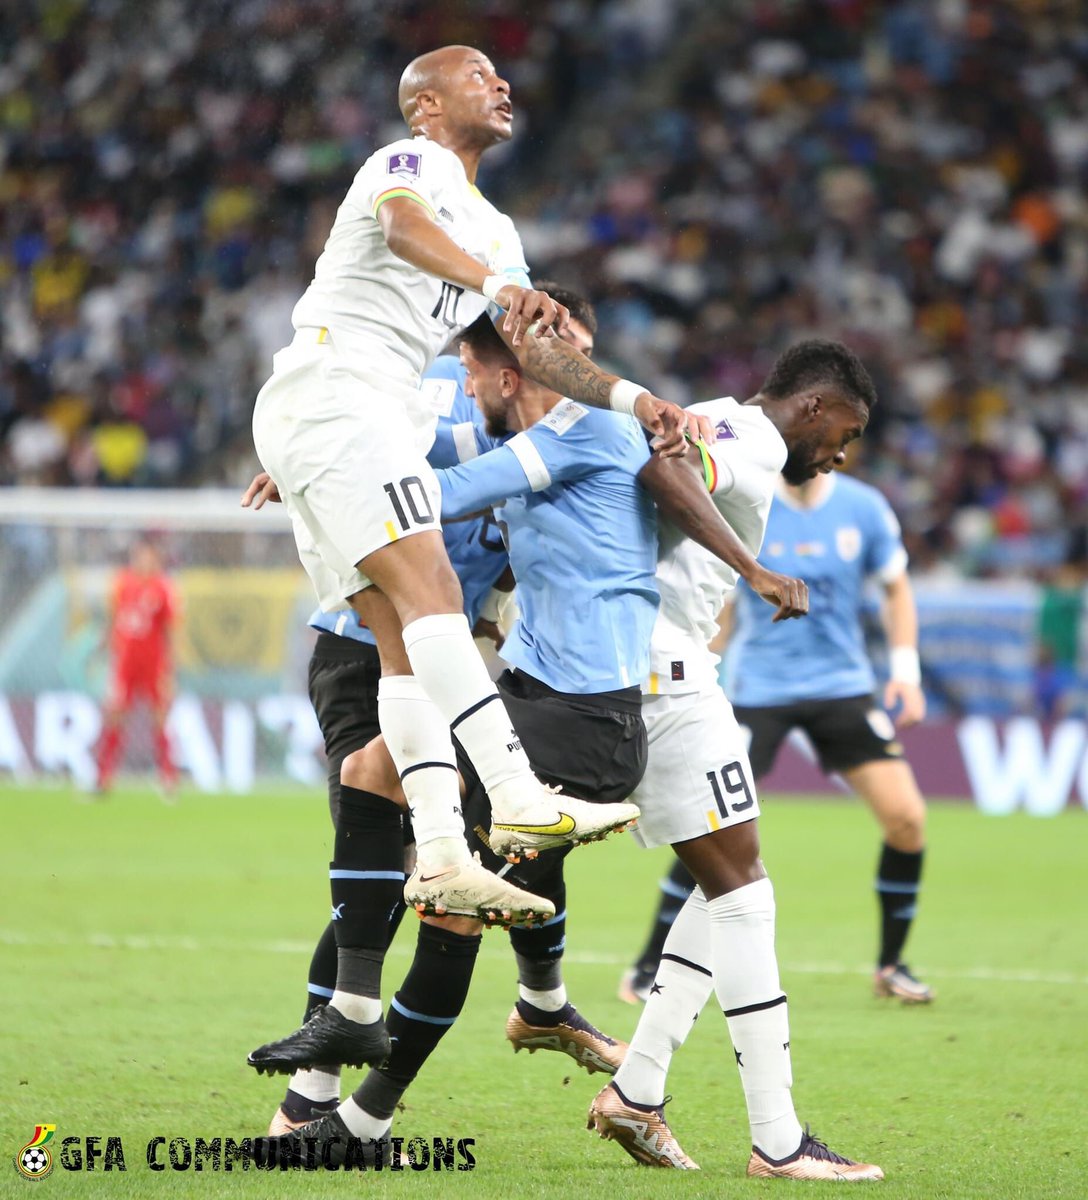 It’s not over because when you’re down you know how to go higher to overcome your problems! Proud of you son💥. The Name is Ayew💗. Alhamduliliah 🙏🙏